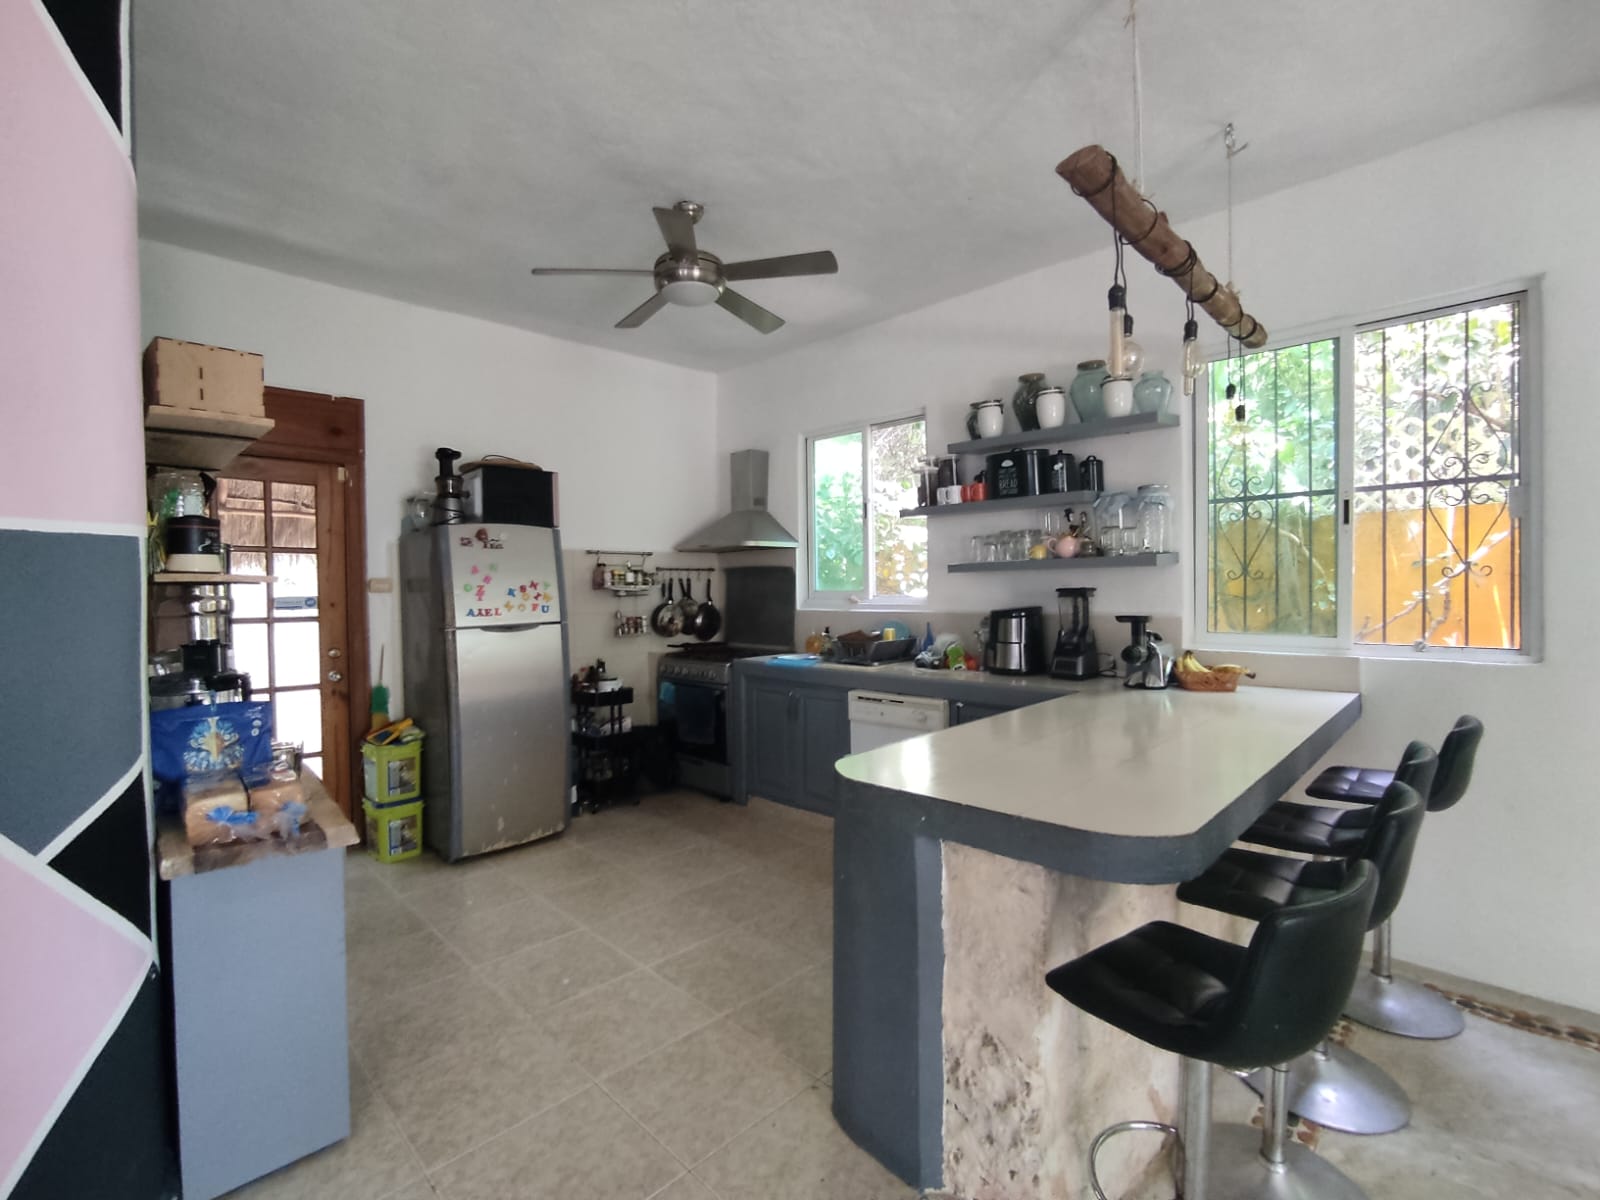 House in Alegranza with clubhouse, pool, games, courts, cenote, for sale